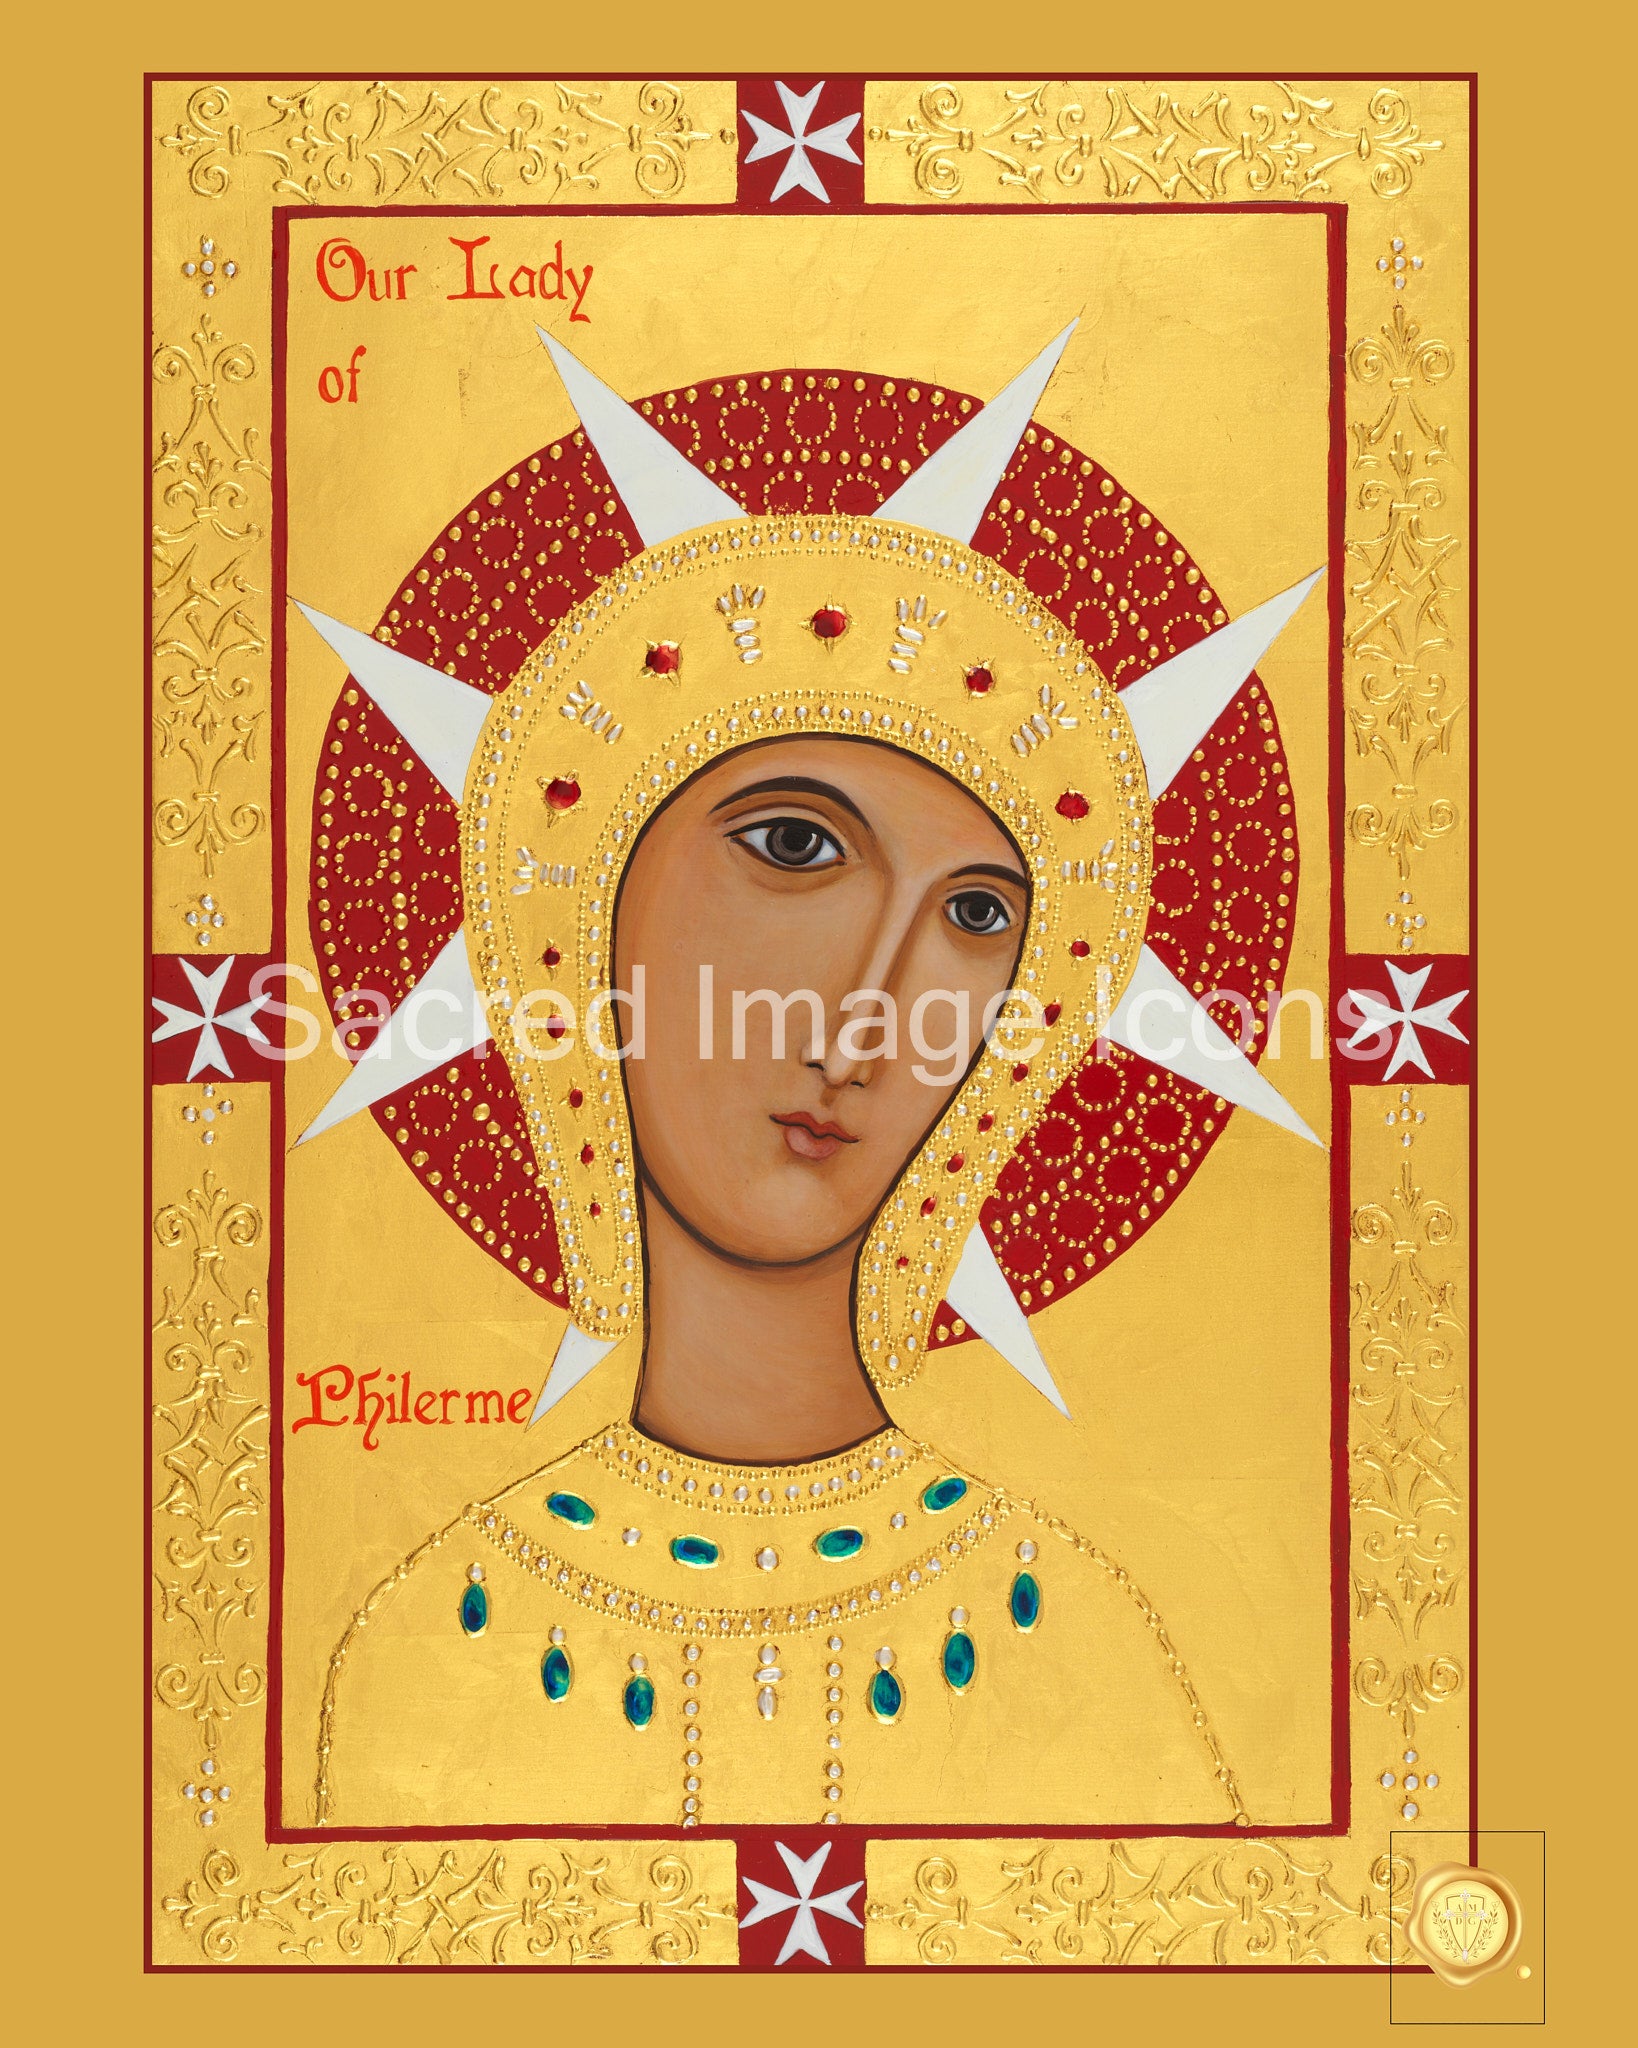 Our Lady of Philerme Icon Print